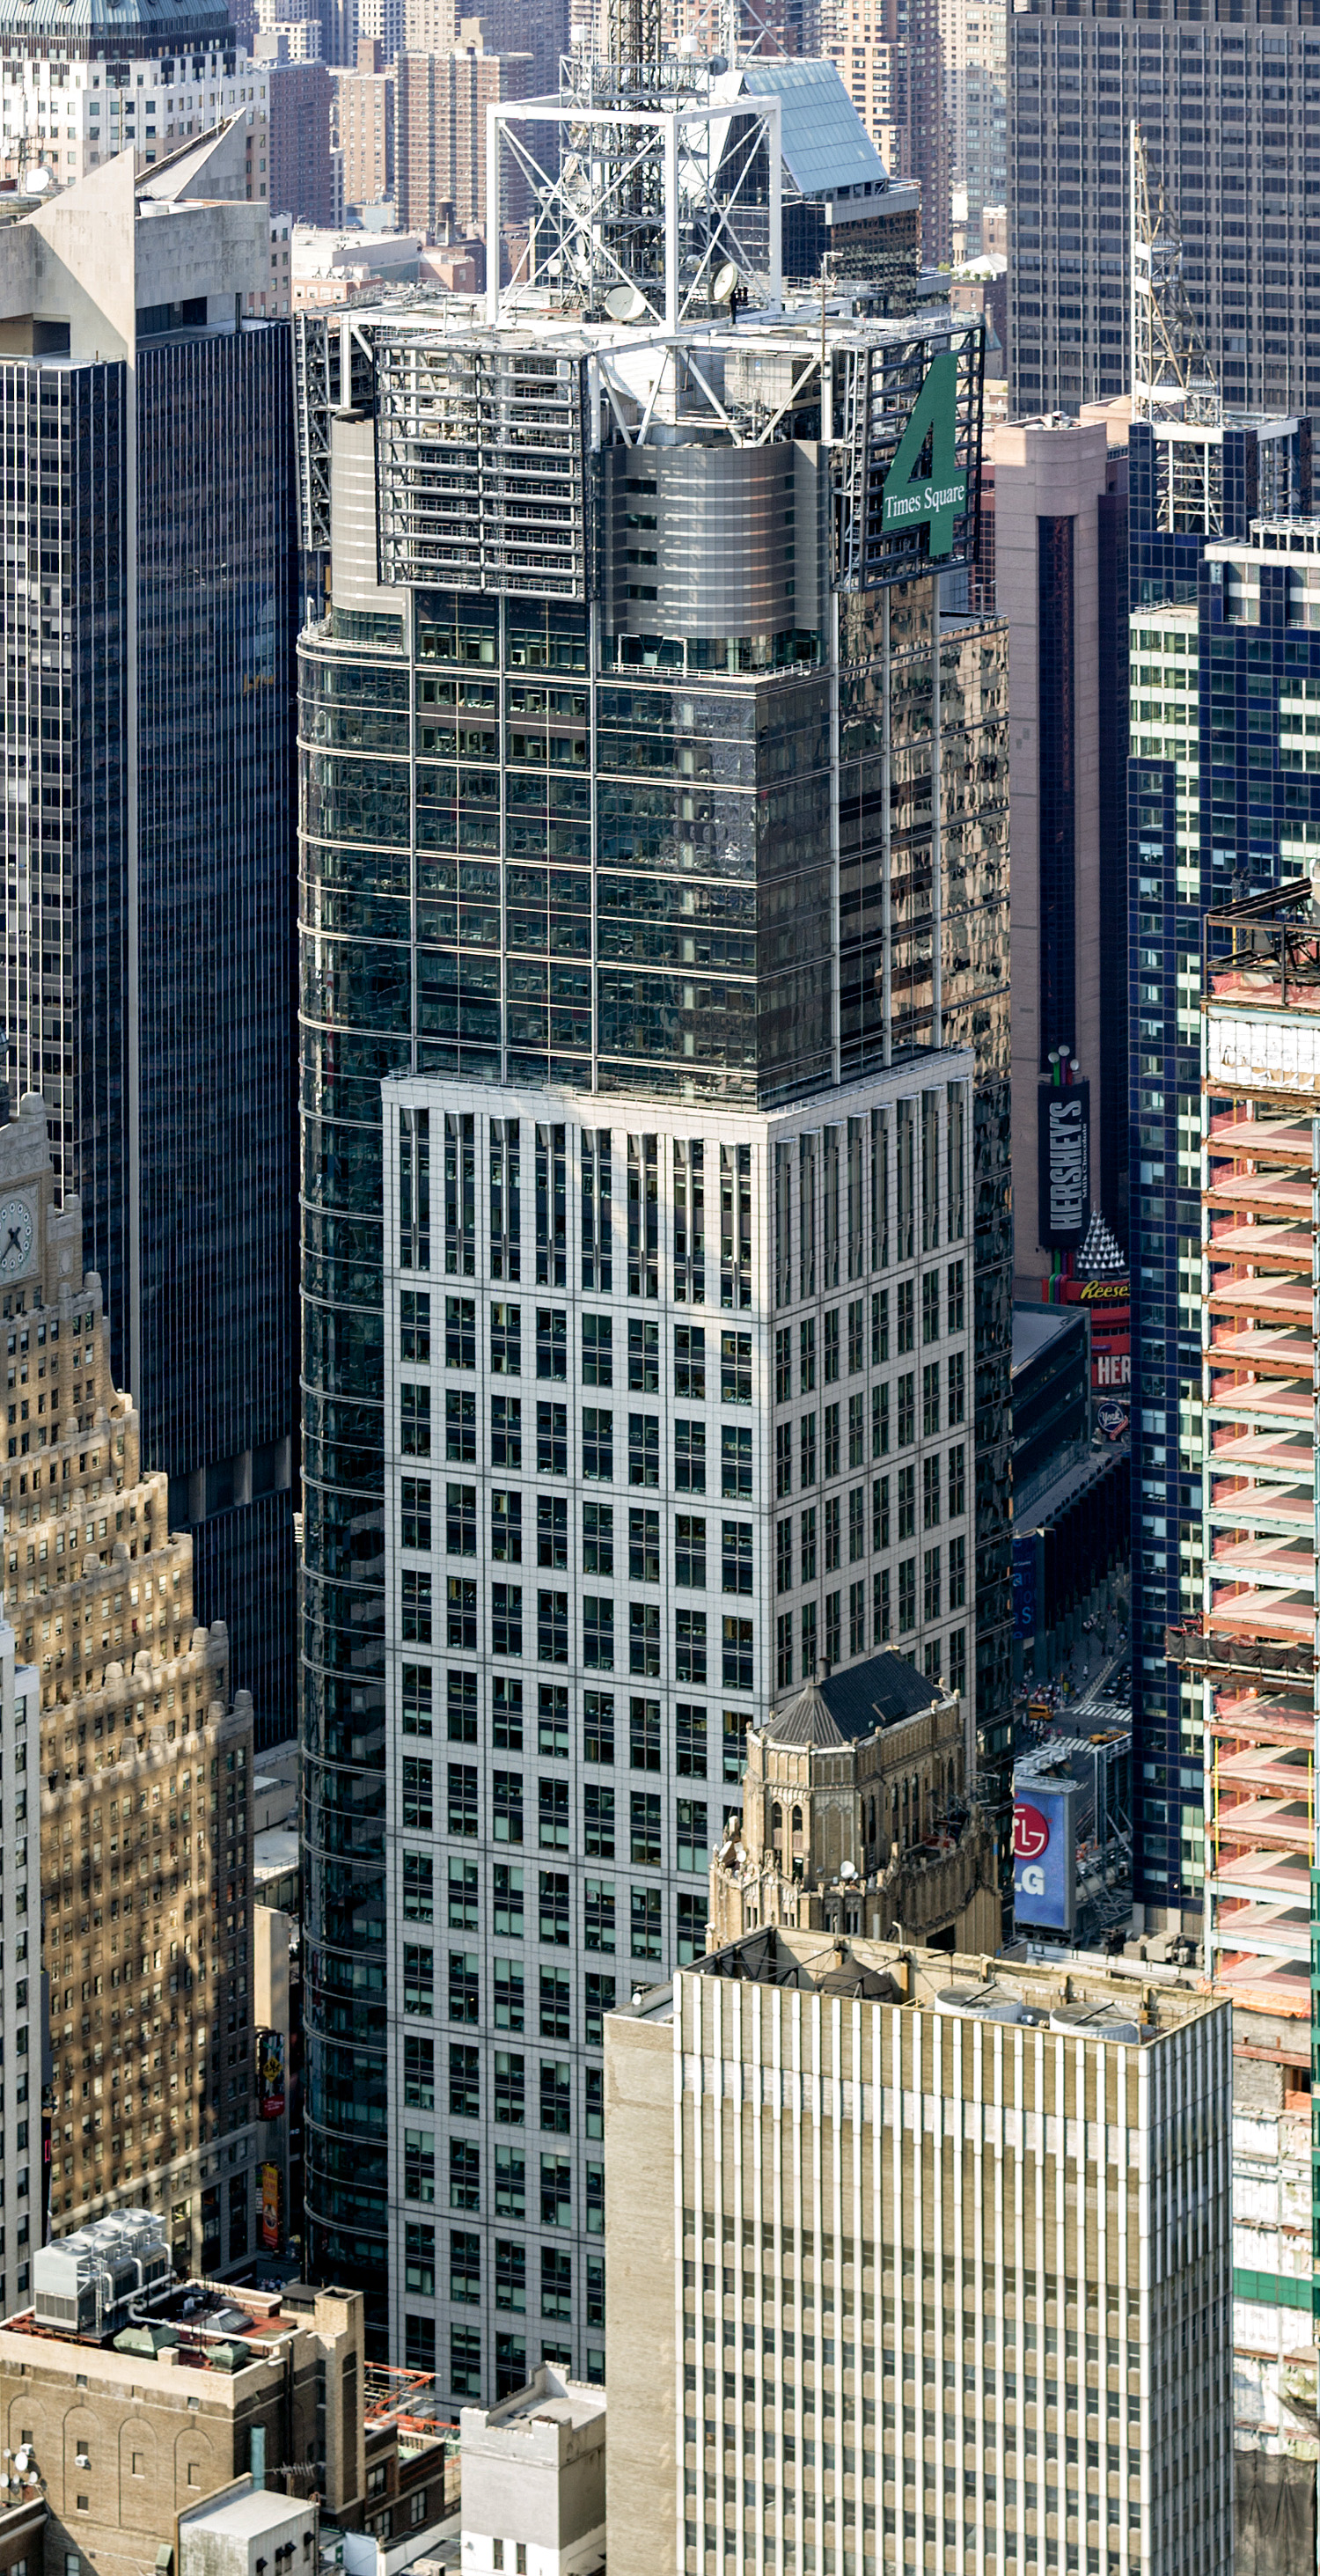 Cond Nast Building, New York City - View from Empire State Building. © Mathias Beinling